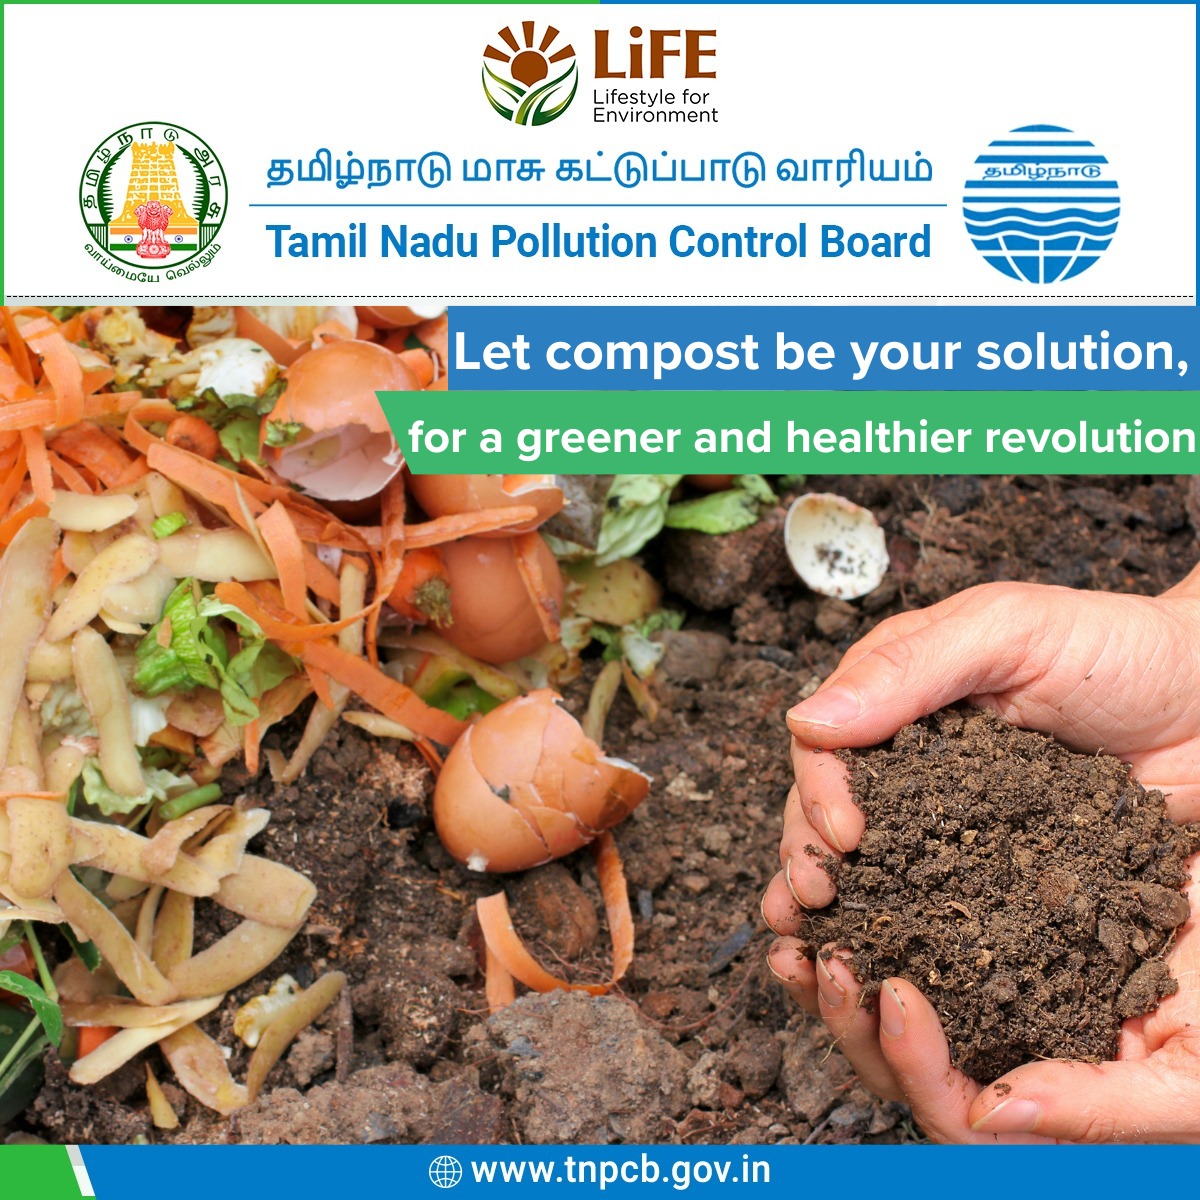 Turn scraps into soil gold! Let compost be your solution, for a greener and healthier revolution. Embrace sustainability with every compost pile. #TamilNaduPollutionControlBoard #TNPCB #Monitoring #Ecotips #TNPCBEcotips #ProtectEnvironment #CompostRevolution #GreenLiving